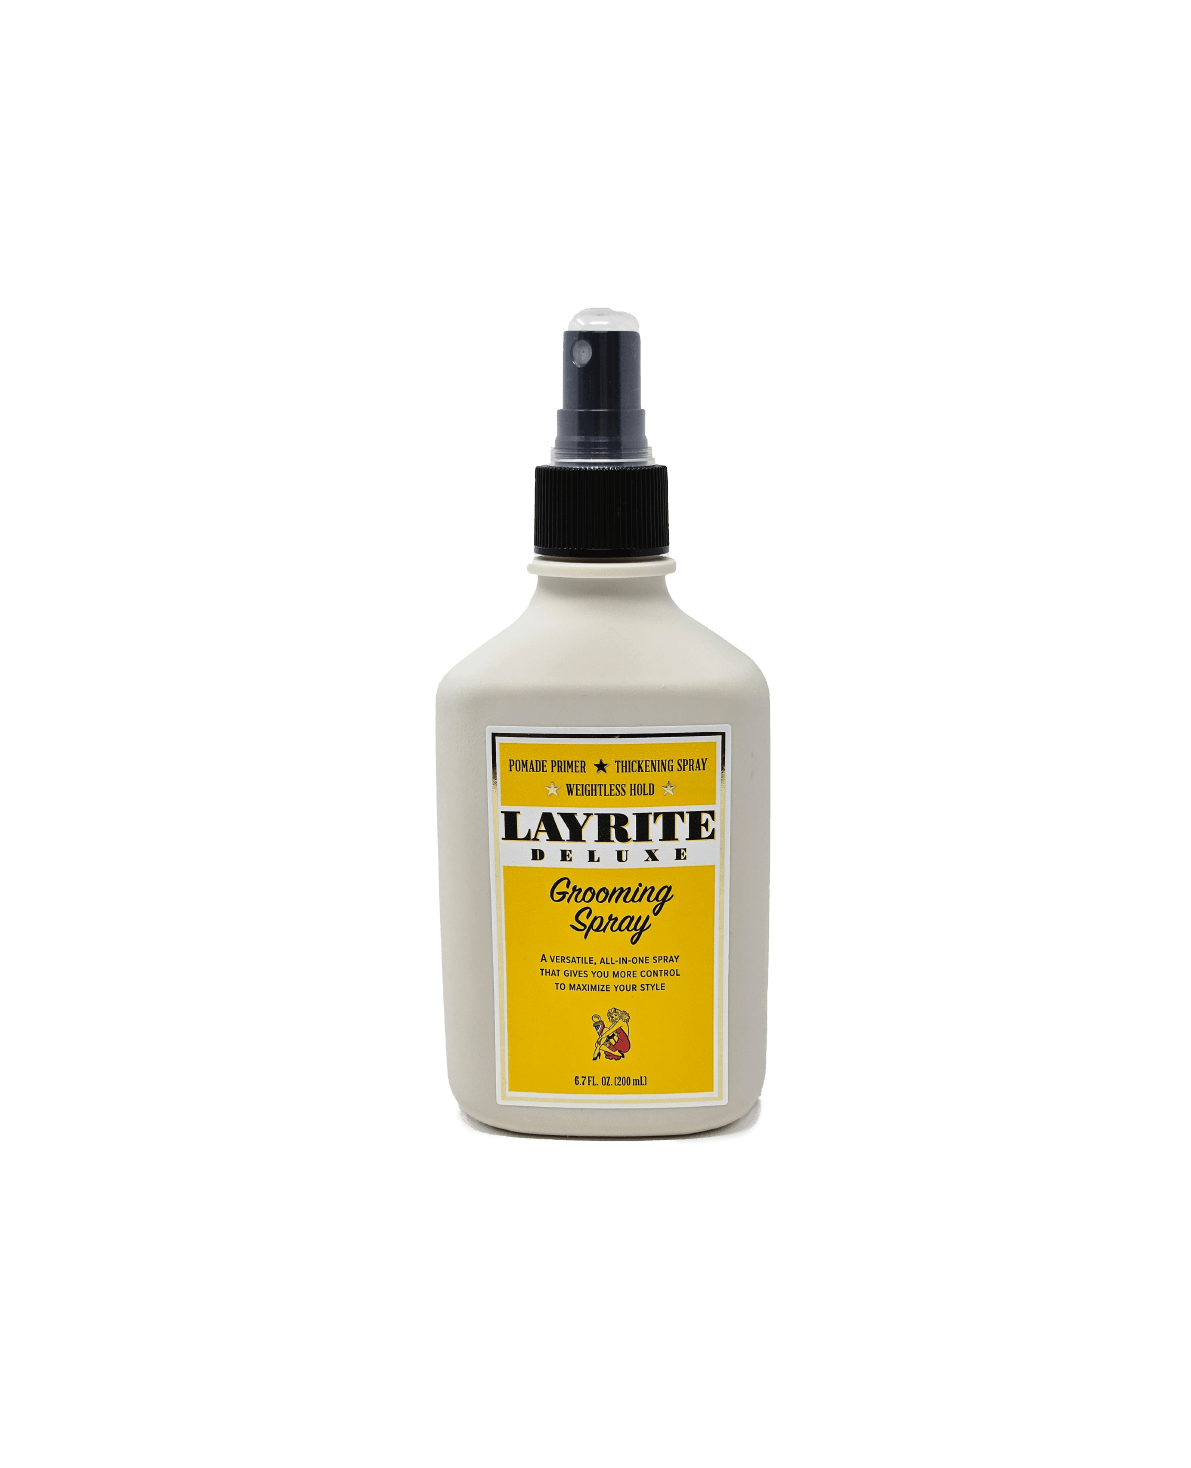 Layrite Deluxe Grooming Spray - 6.7oz